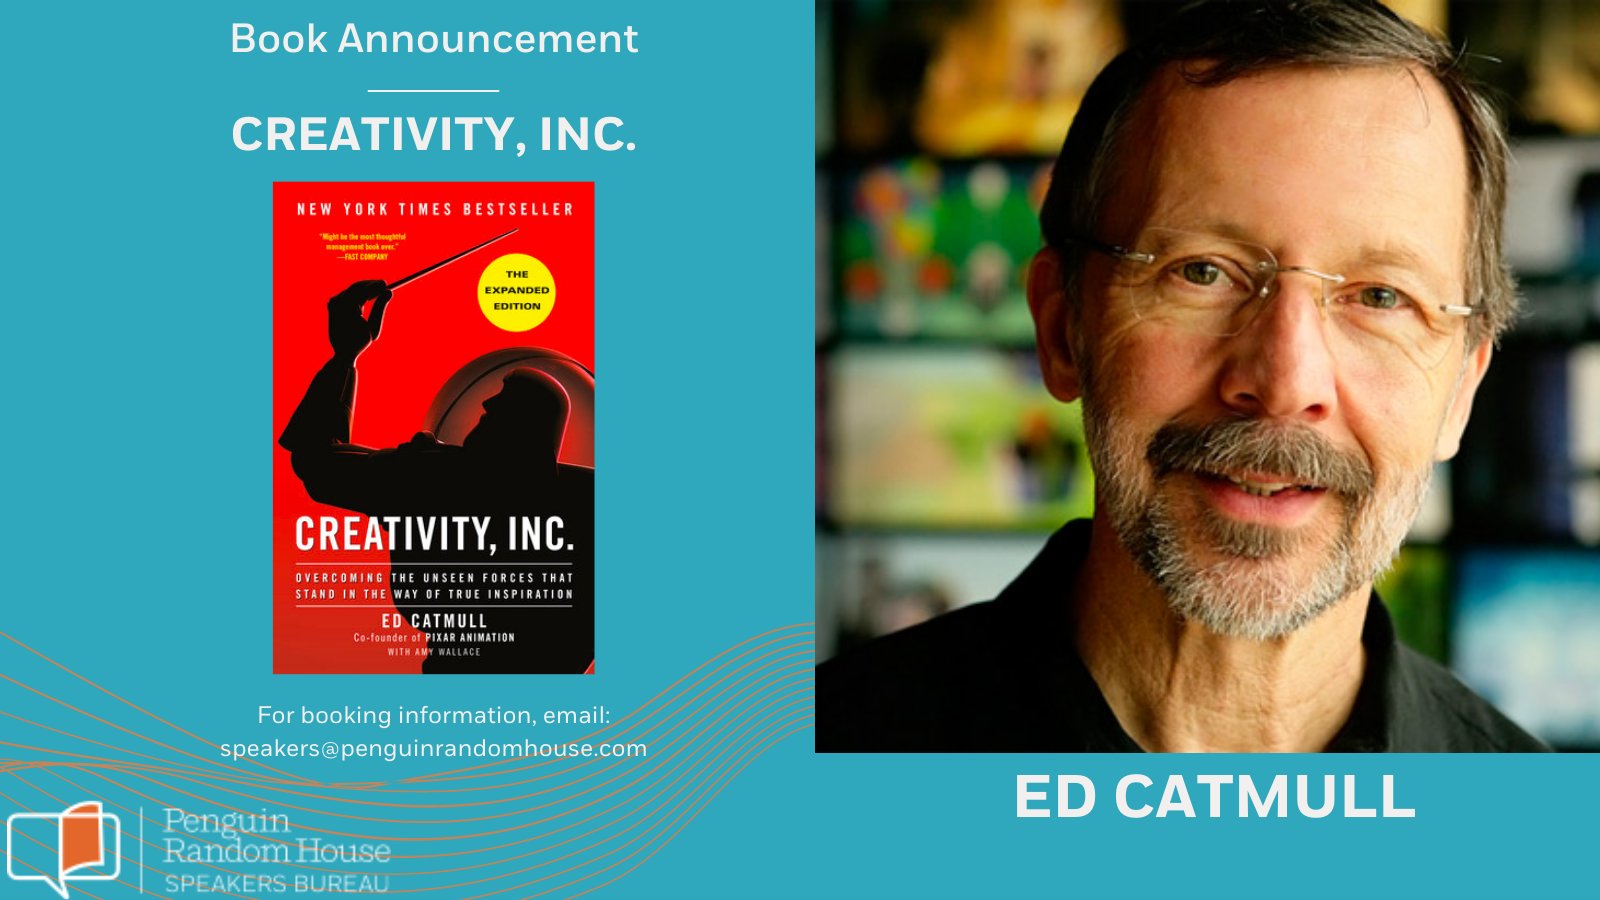 Creativity, Inc. (The Expanded Edition) by Ed Catmull, Amy Wallace